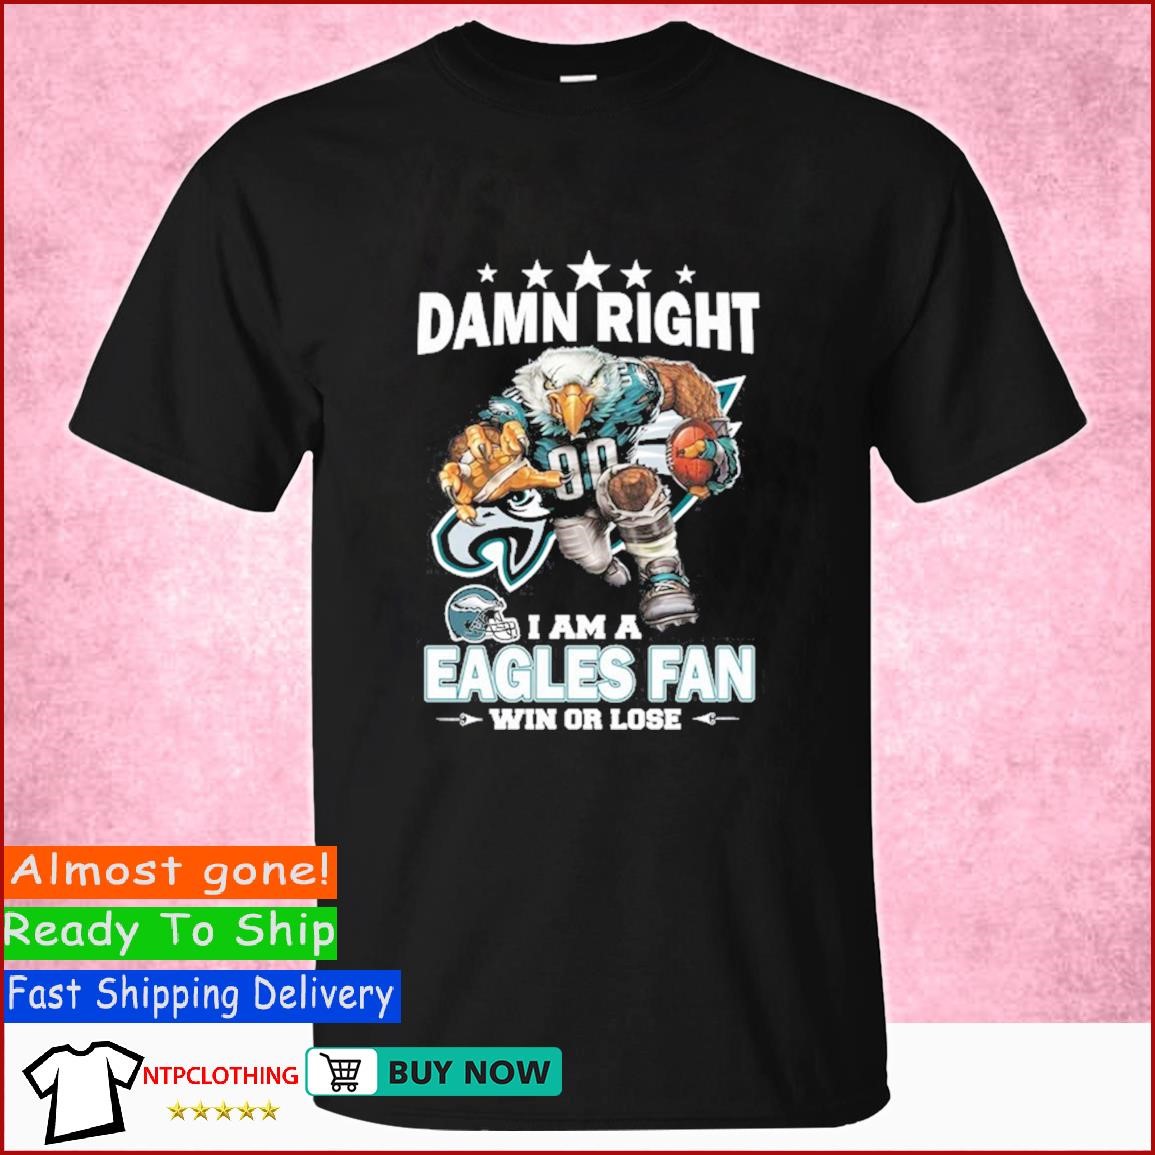 Funny Philadelphia Eagles Shirts, Gifts For Eagles Fans - Happy